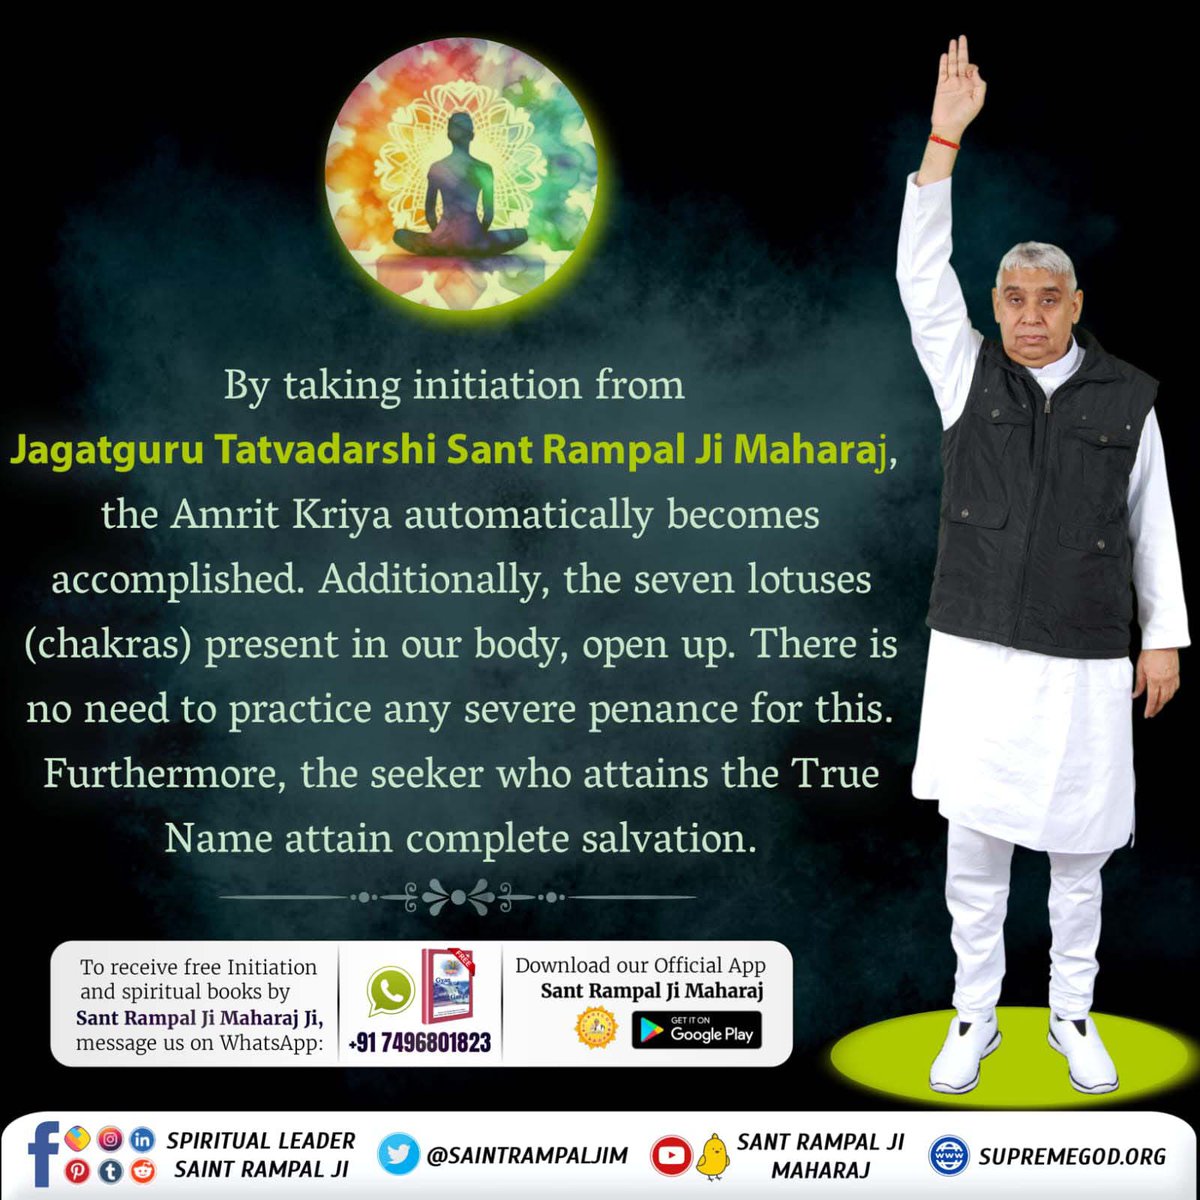 #What_Is_Meditation
By taking initiation from Jagatguru Tatvadarshi Sant Rampal Ji Maharaj, the Amrit Kriya automatically becomes accomplished. Additionally, the seven lotuses (chakras) present in our body, open up. There is no need to 
Sant Rampal Ji Maharaj